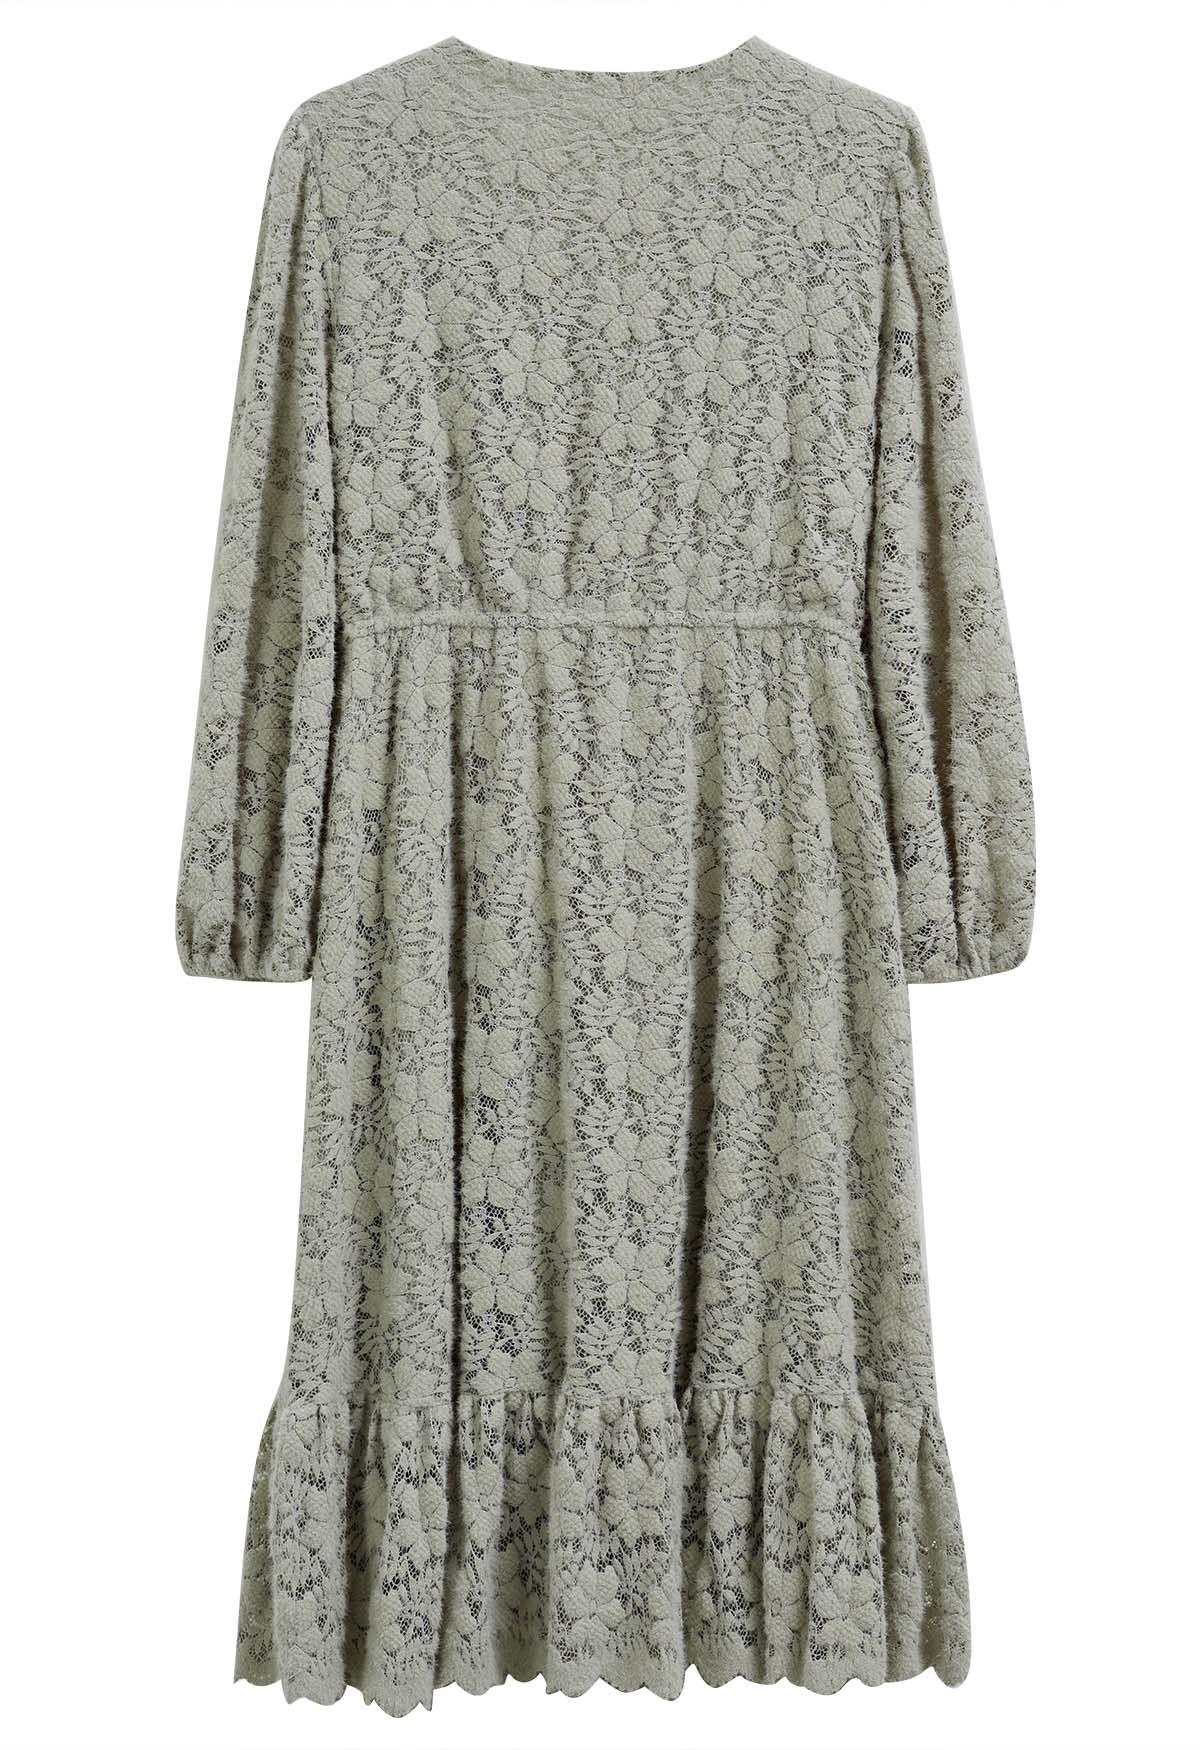 Button Down Full Floral Lace Frilling Dress in Pea Green